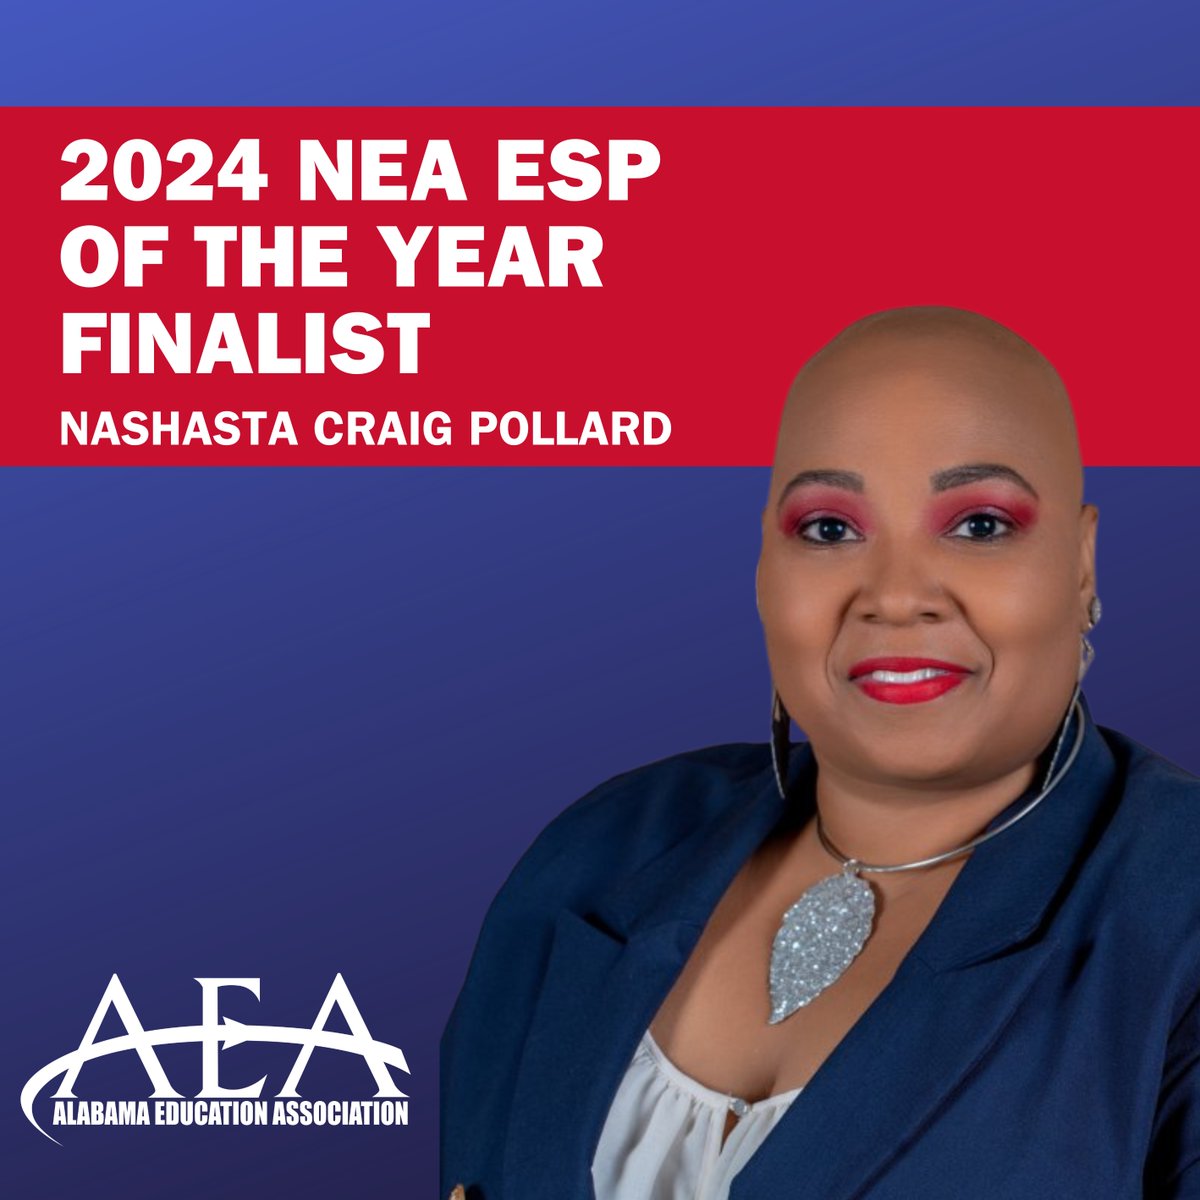 AEA members represent the nation’s best and brightest educators! Nashasta Craig Pollard is one of five finalists for 2024 NEA ESP of the Year. To learn more, visit bit.ly/4btEDQO. Congratulations Nashasta! #myAEA